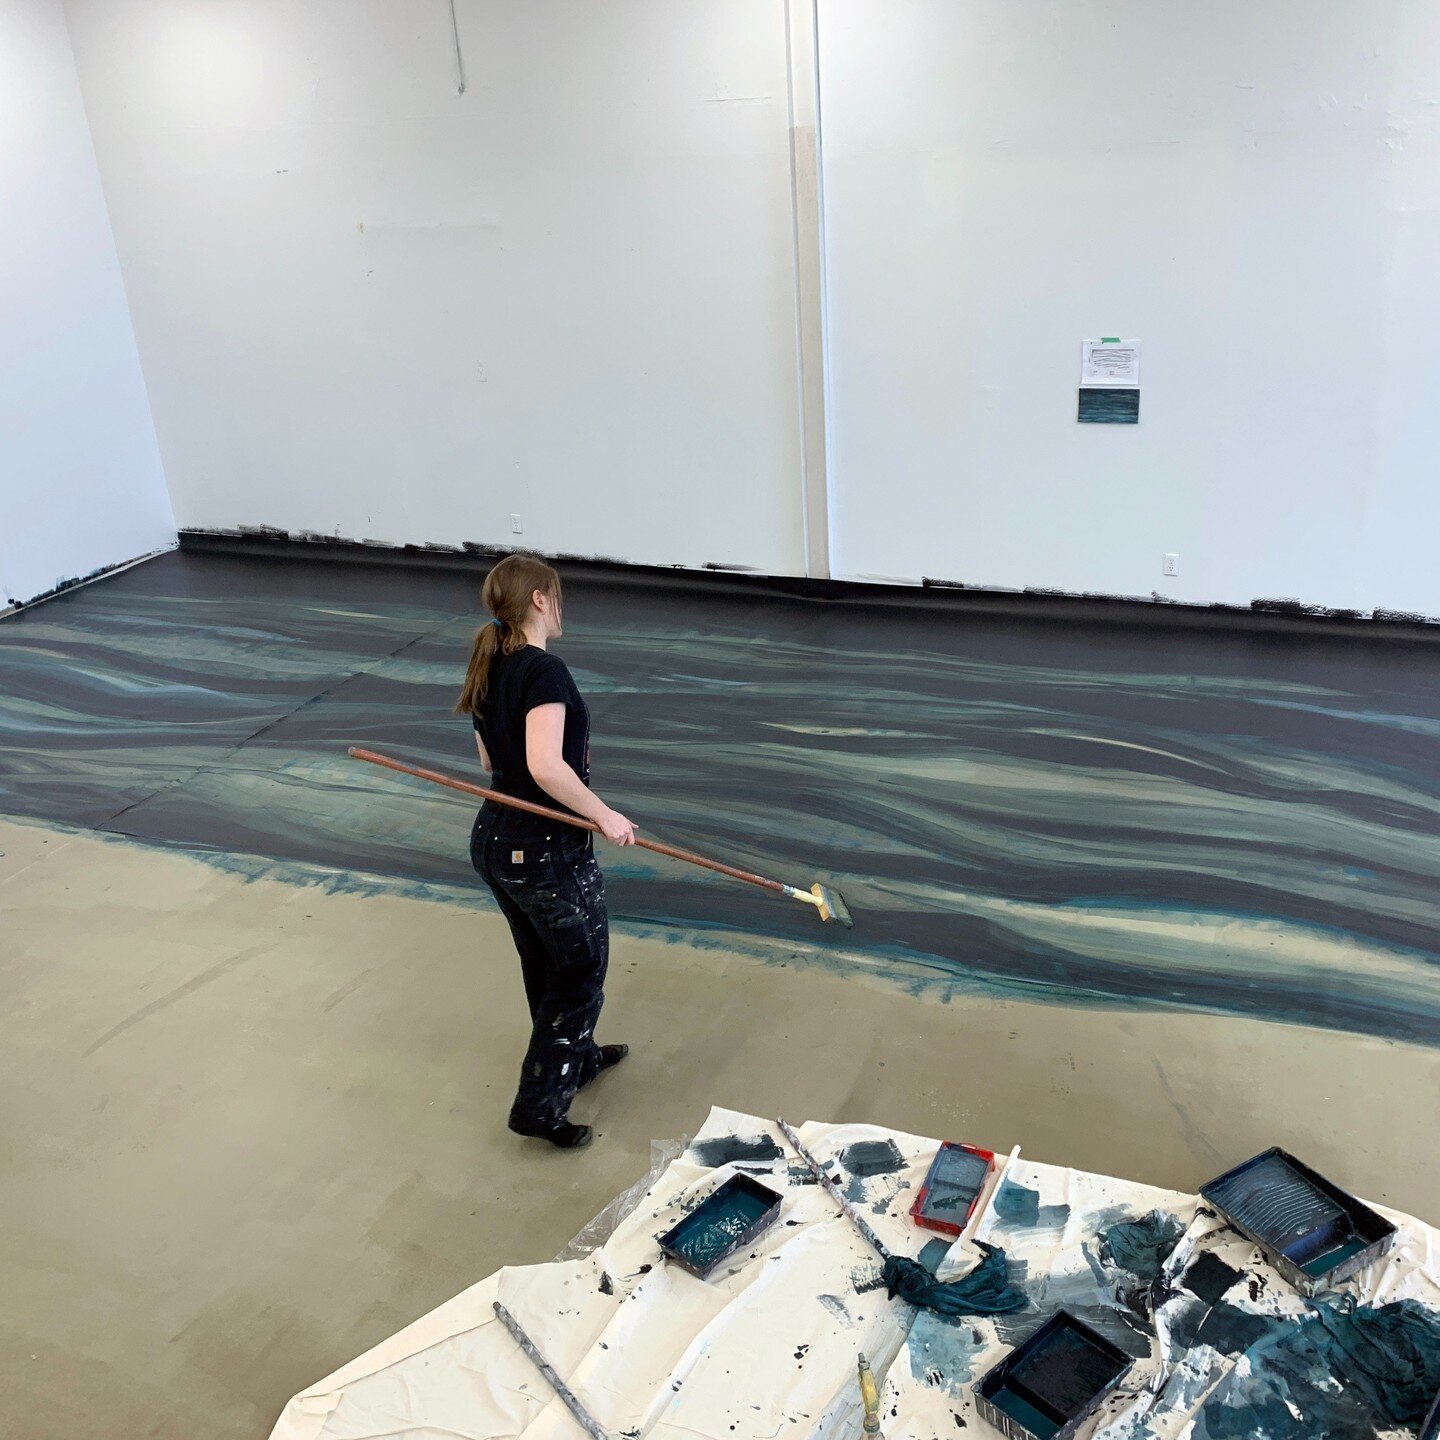 Another Must See: Of The Sea 
(A co-production of Obsidian Theatre + Tapestry Opera shown at the Bluma Appel Theatre). 
It's a short run and ends April 1st. 
McWood painted the 24' x 48' scenic floor. The roiling sea!
#tapestryopera #ofthesea #scenic